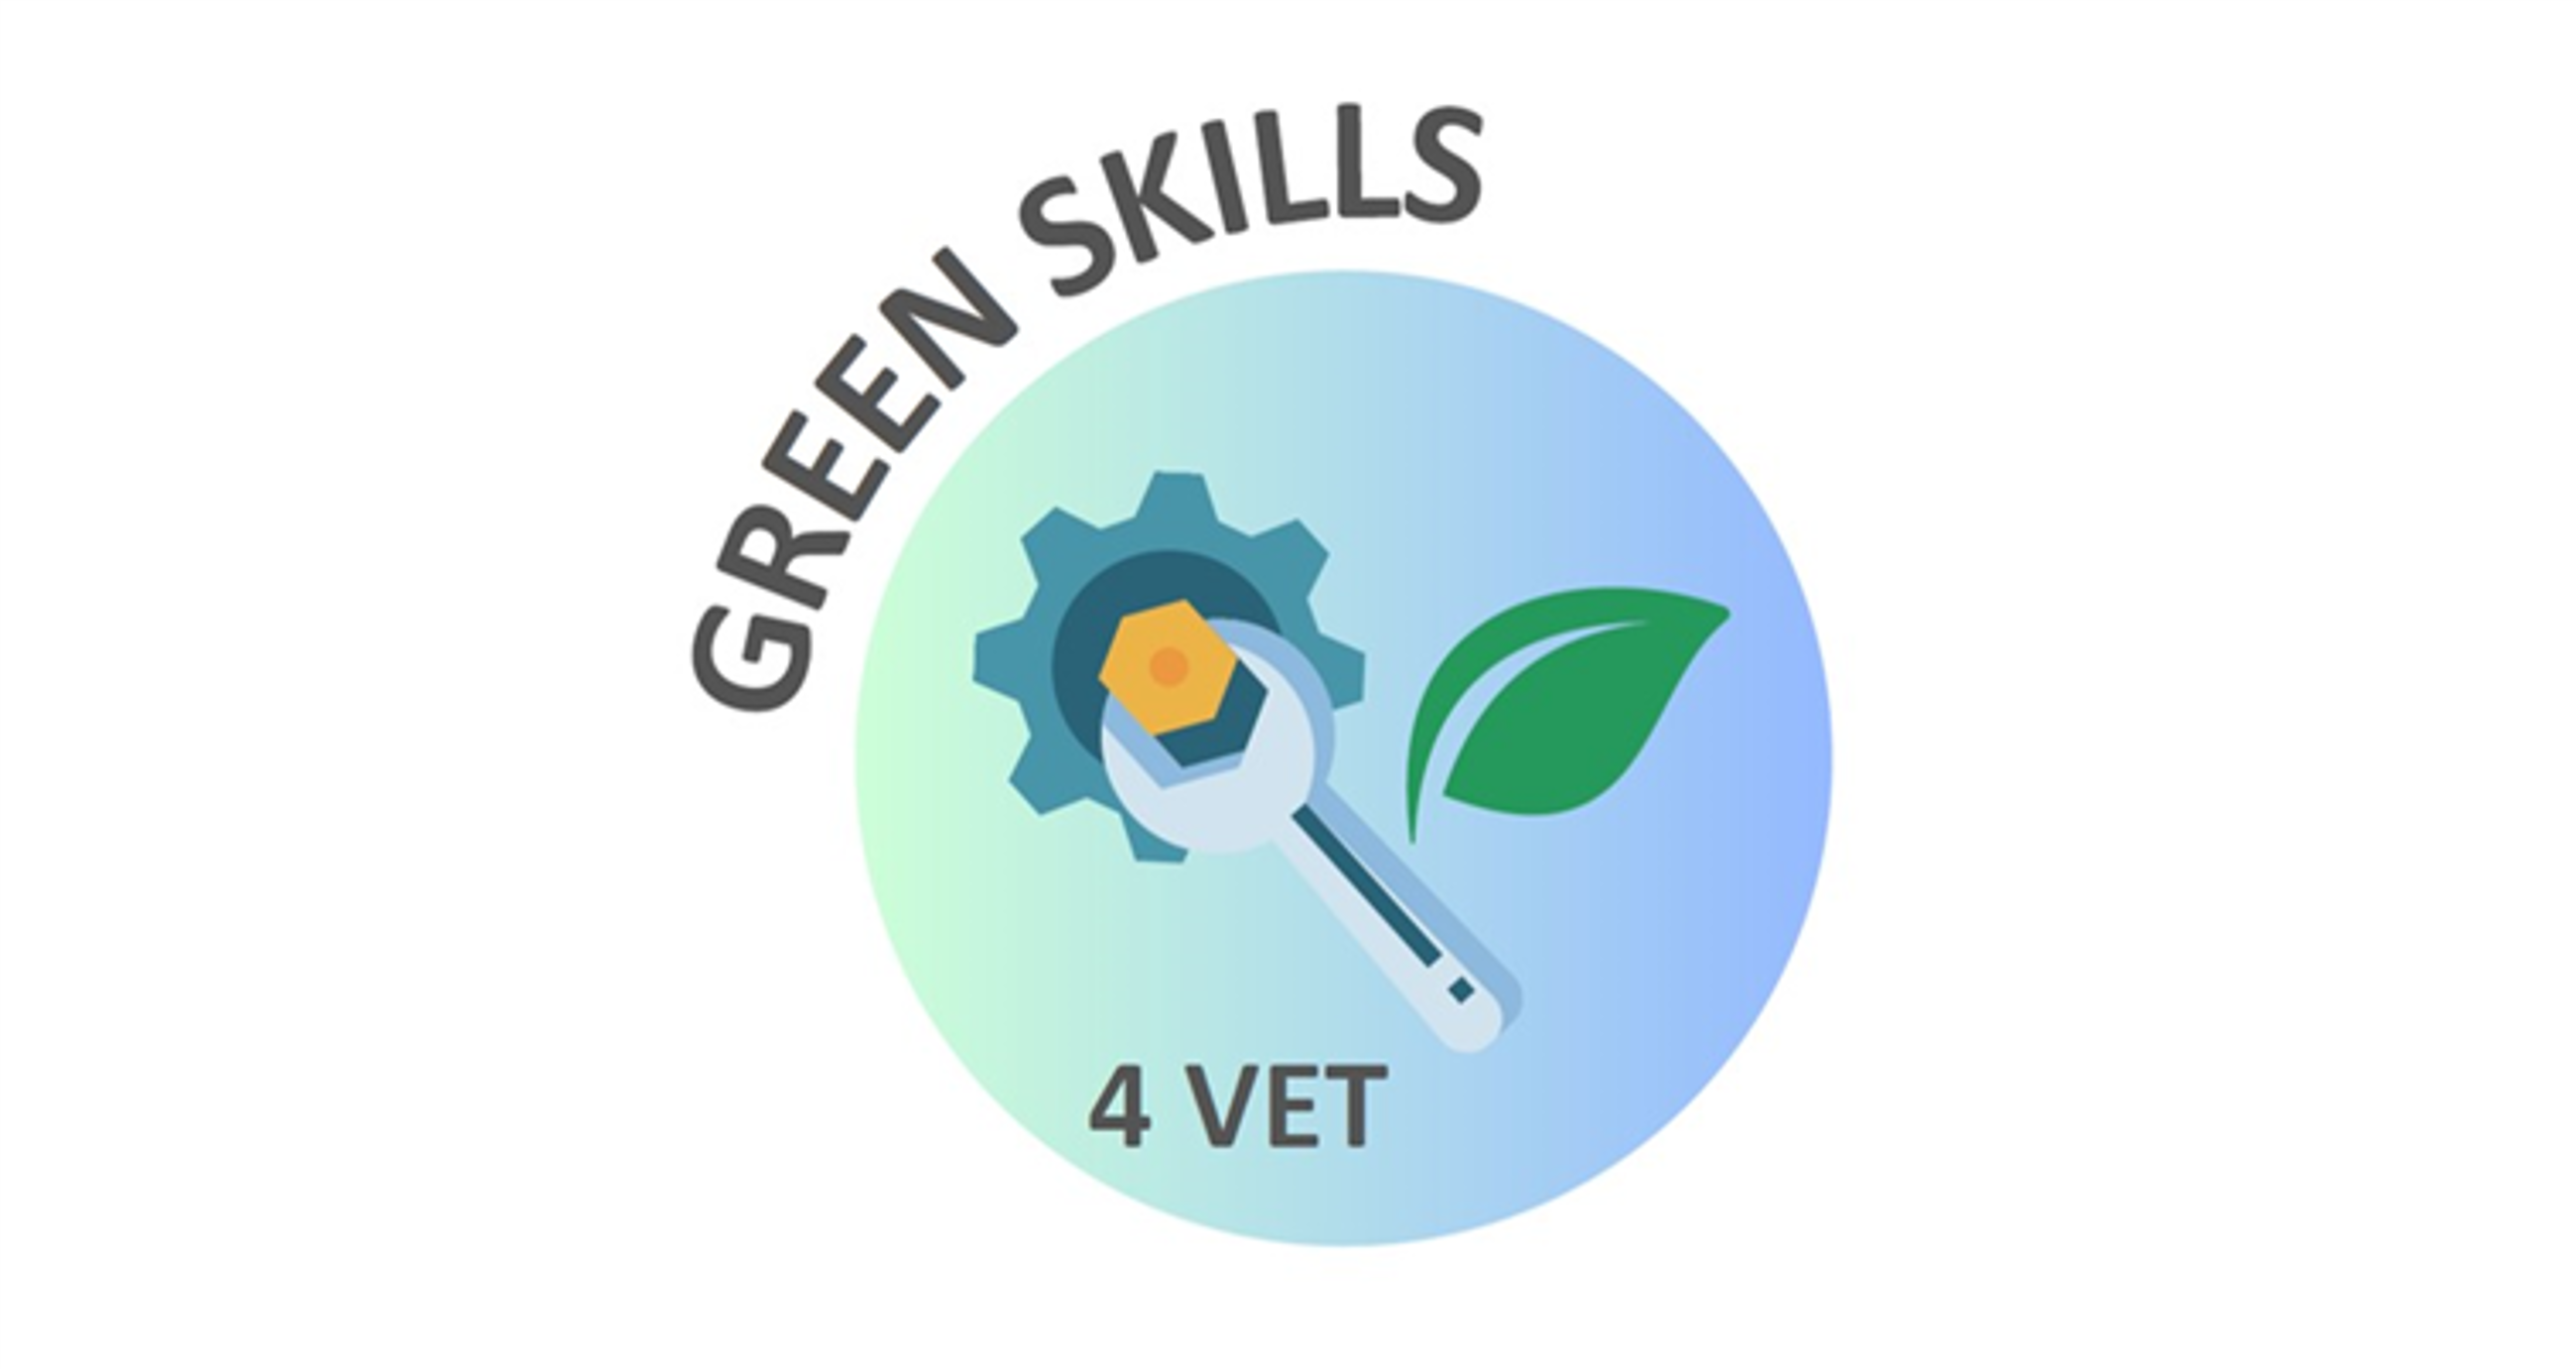 The European Green Skills for VET (GS4VET) project starts, in which PROSPEKTIKER participates